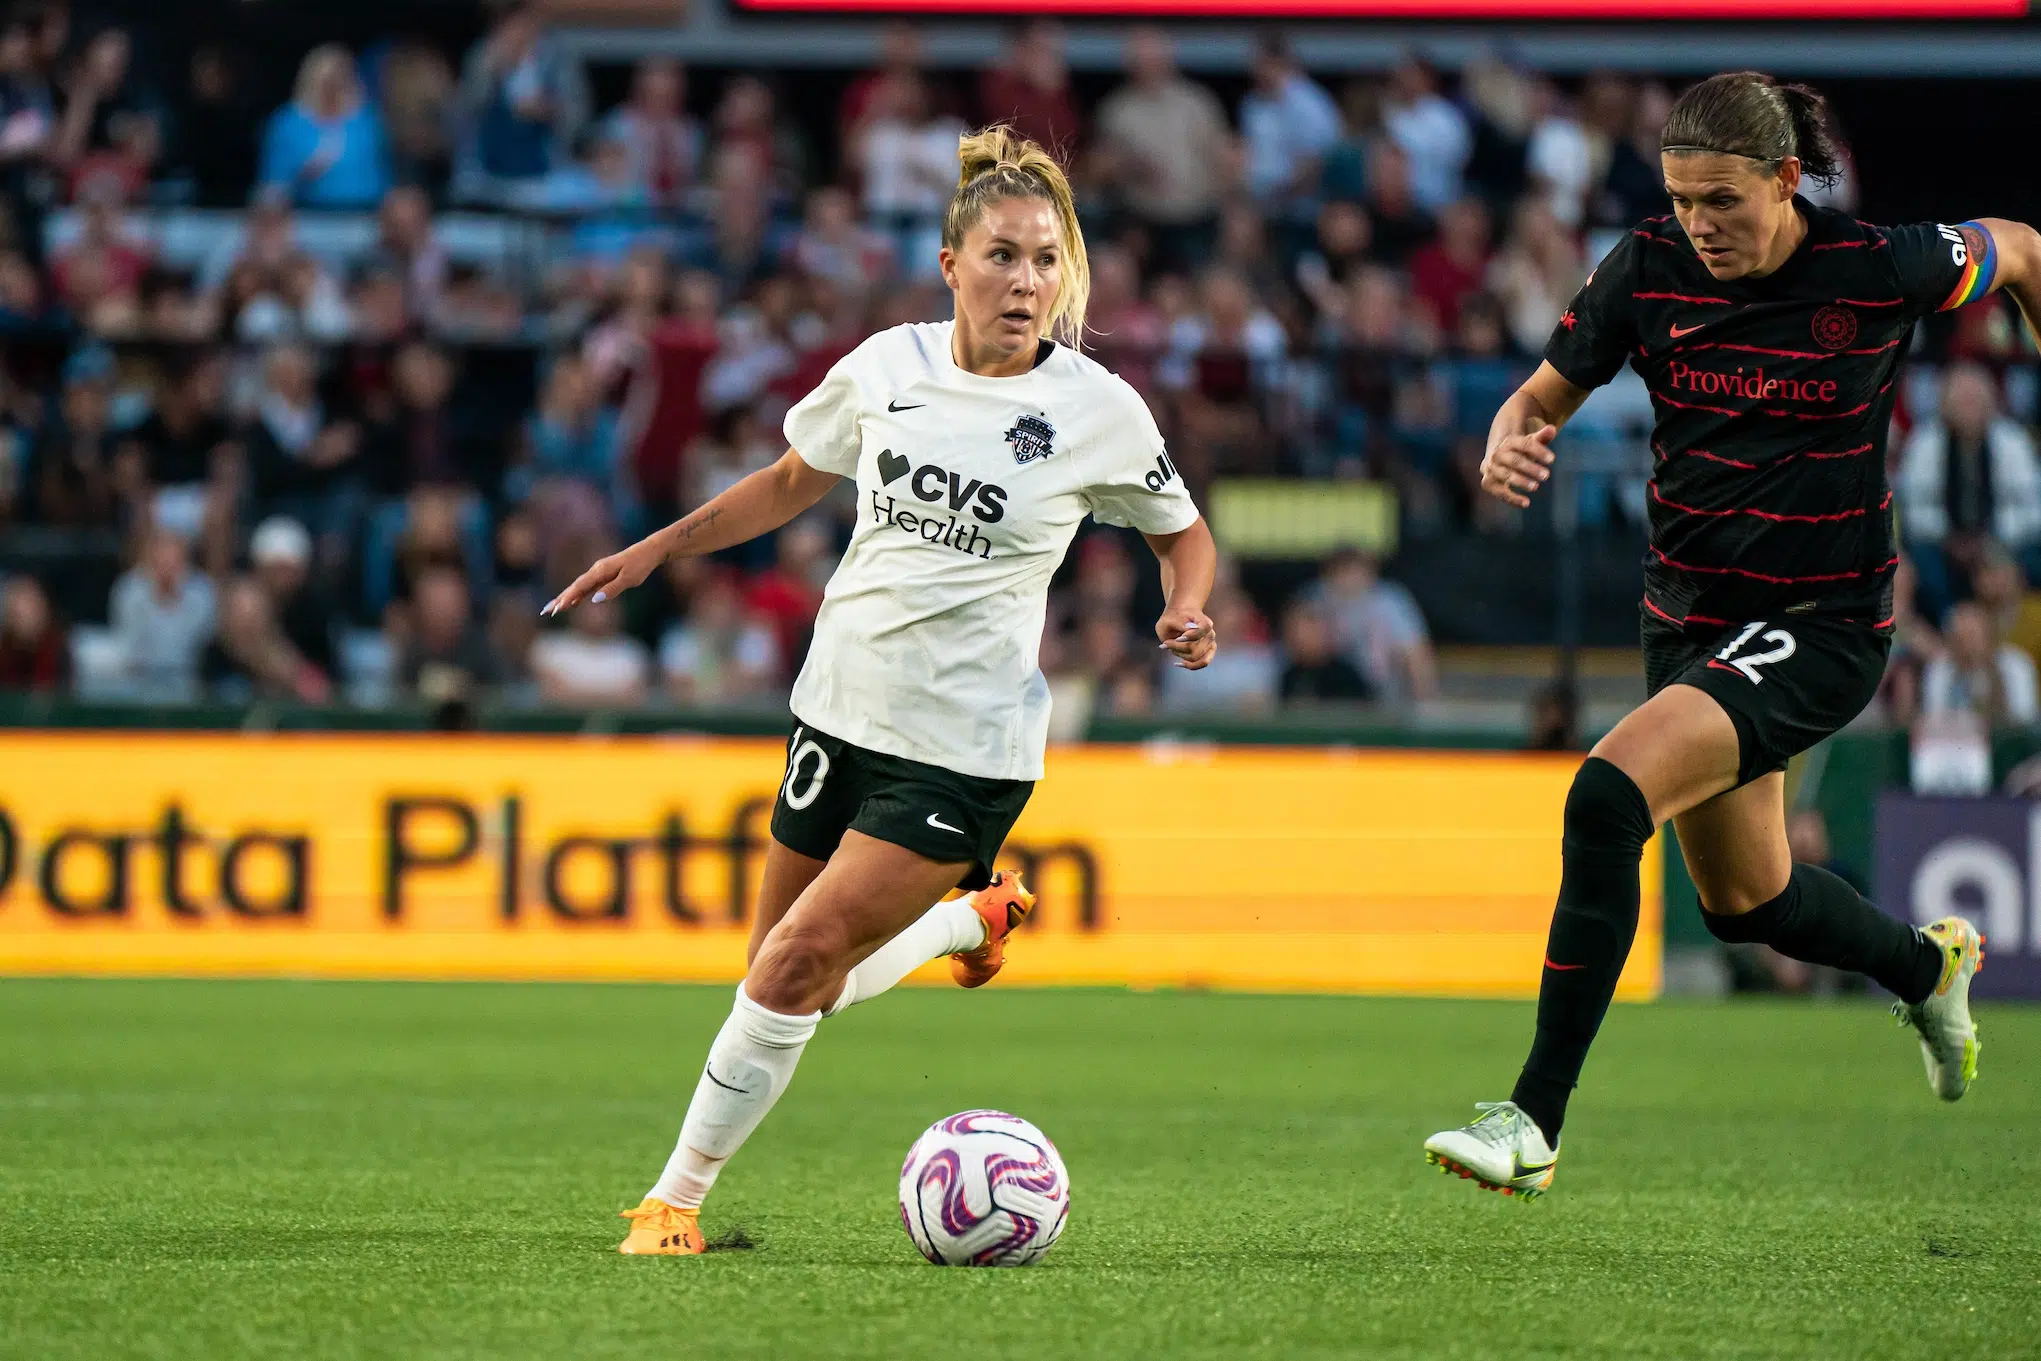 Ashley Sanchez in a white jersey, black shorts and white socks dribbles the ball past Christine Sinclair who is wearing a black uniform.